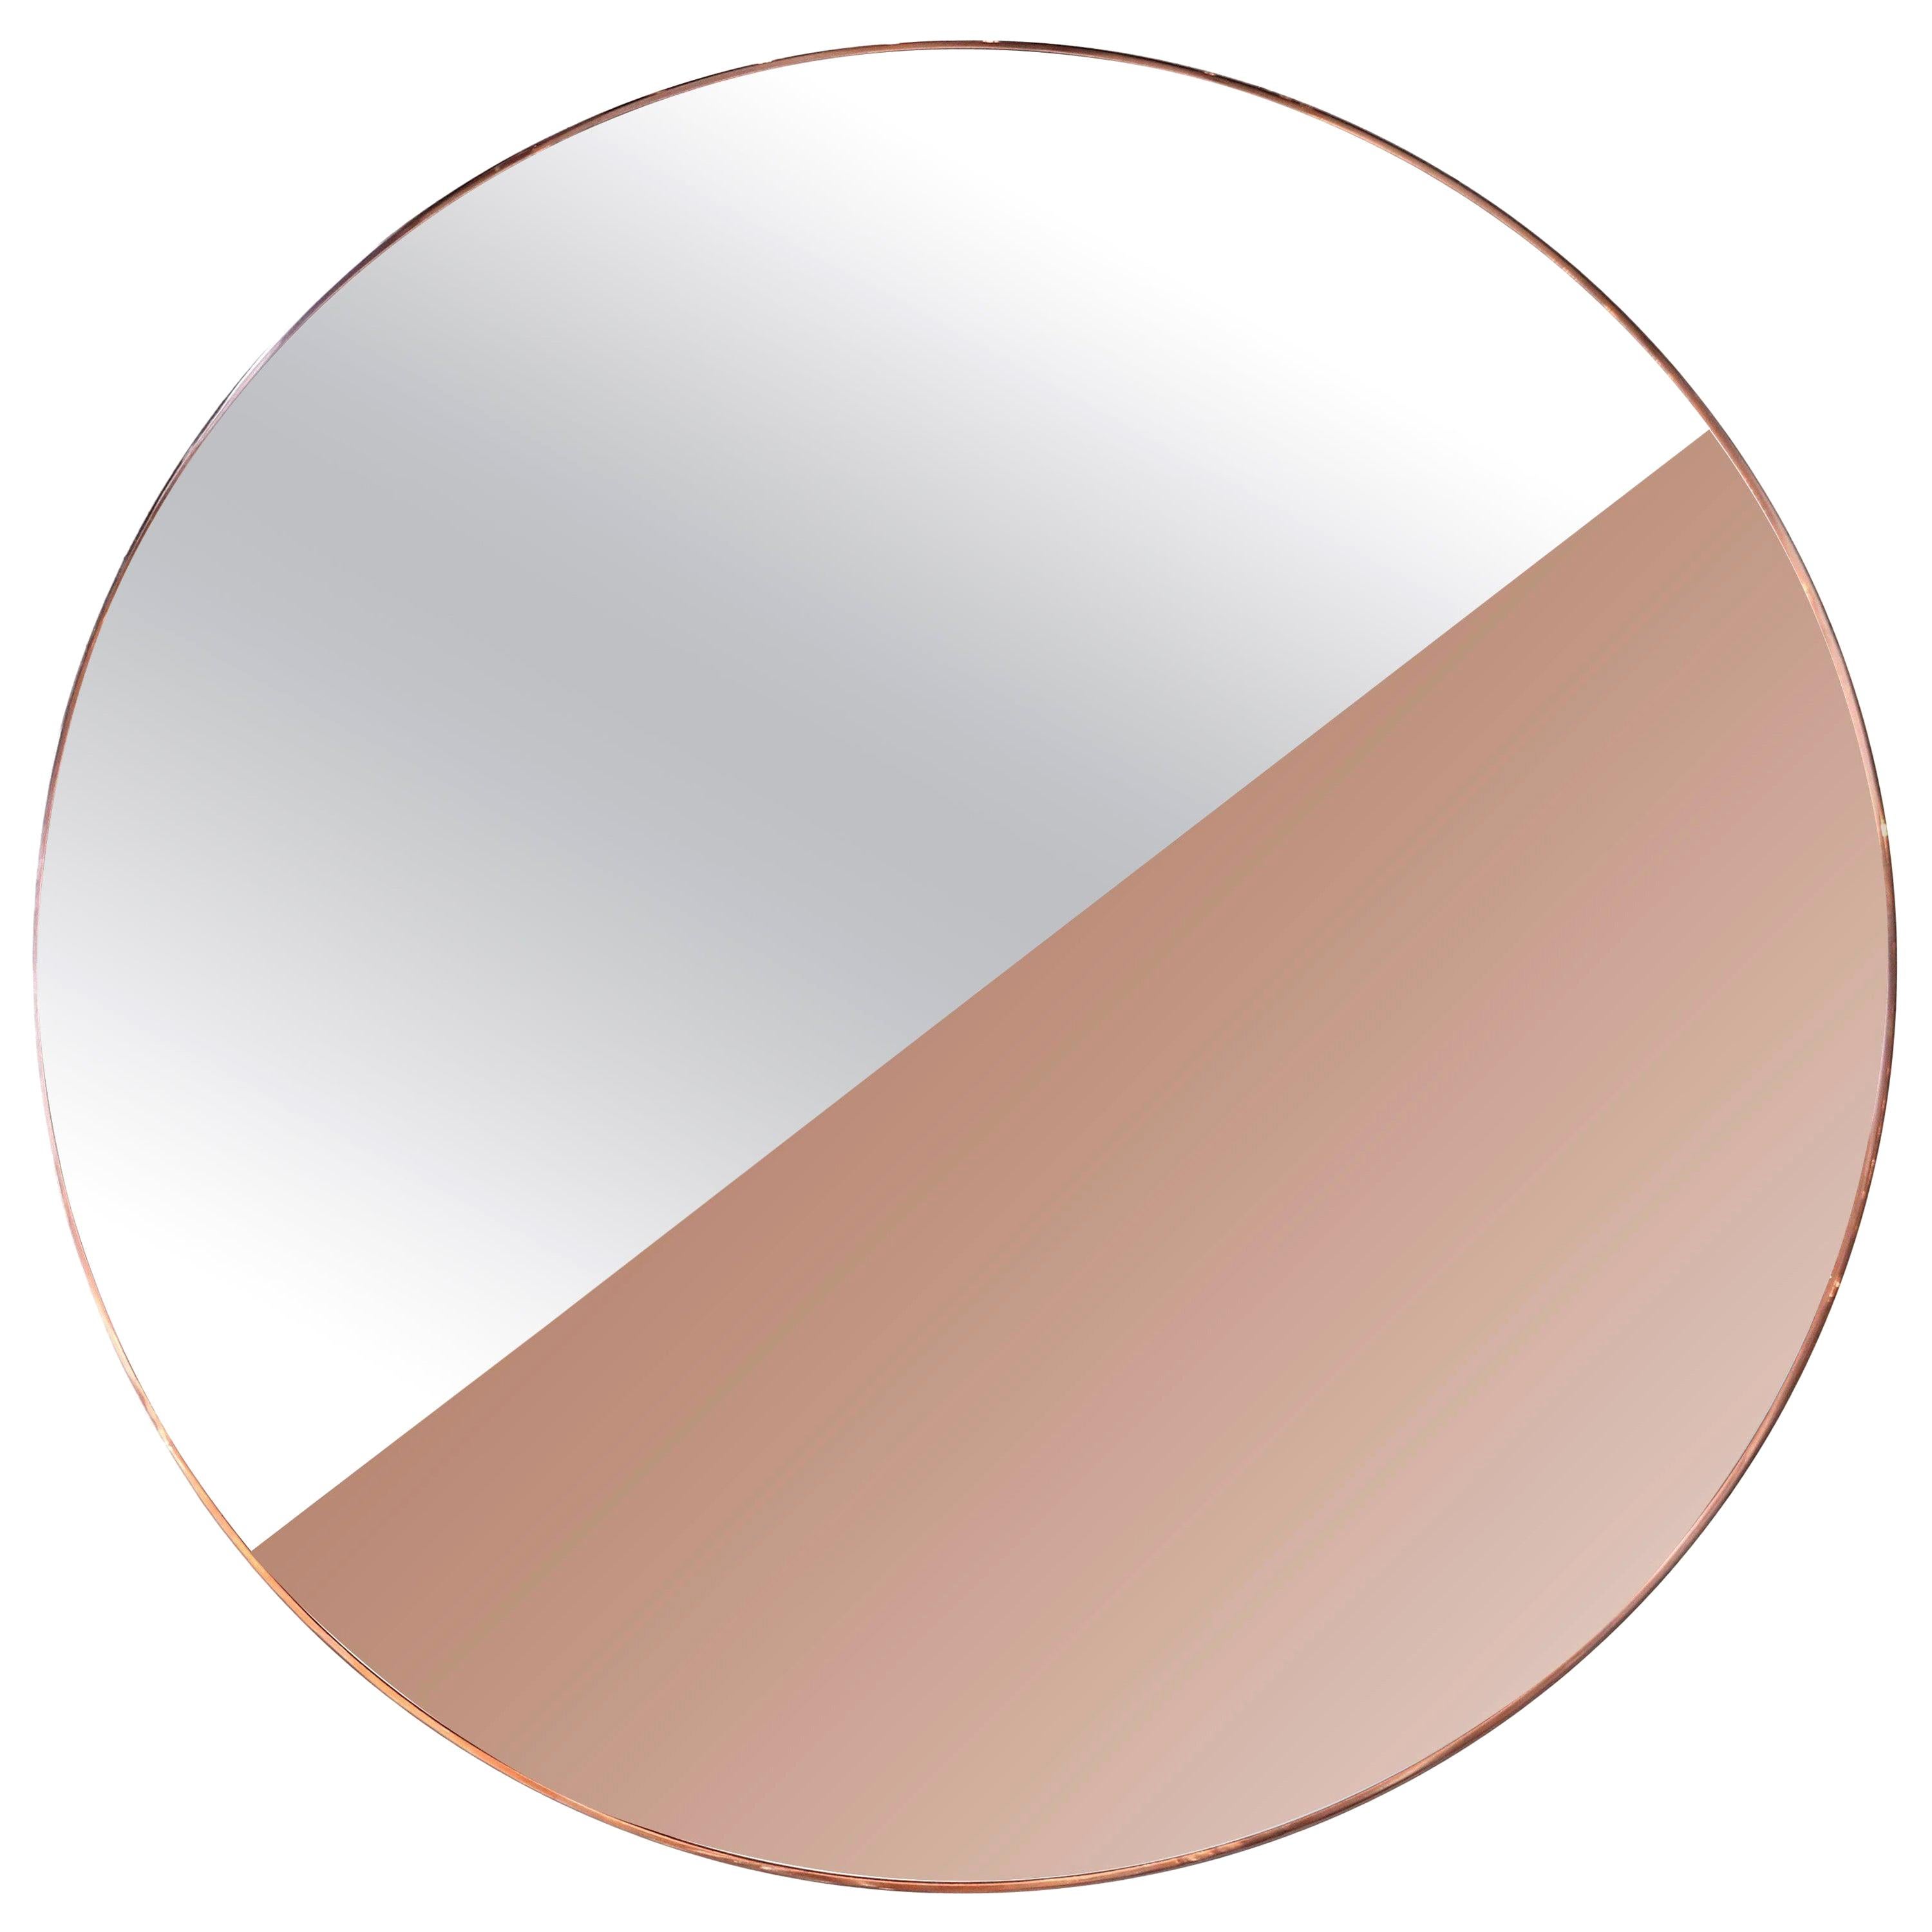 Custom Half Silver Half Apricot Round Mirror with Copper Frame by Adesso Imports